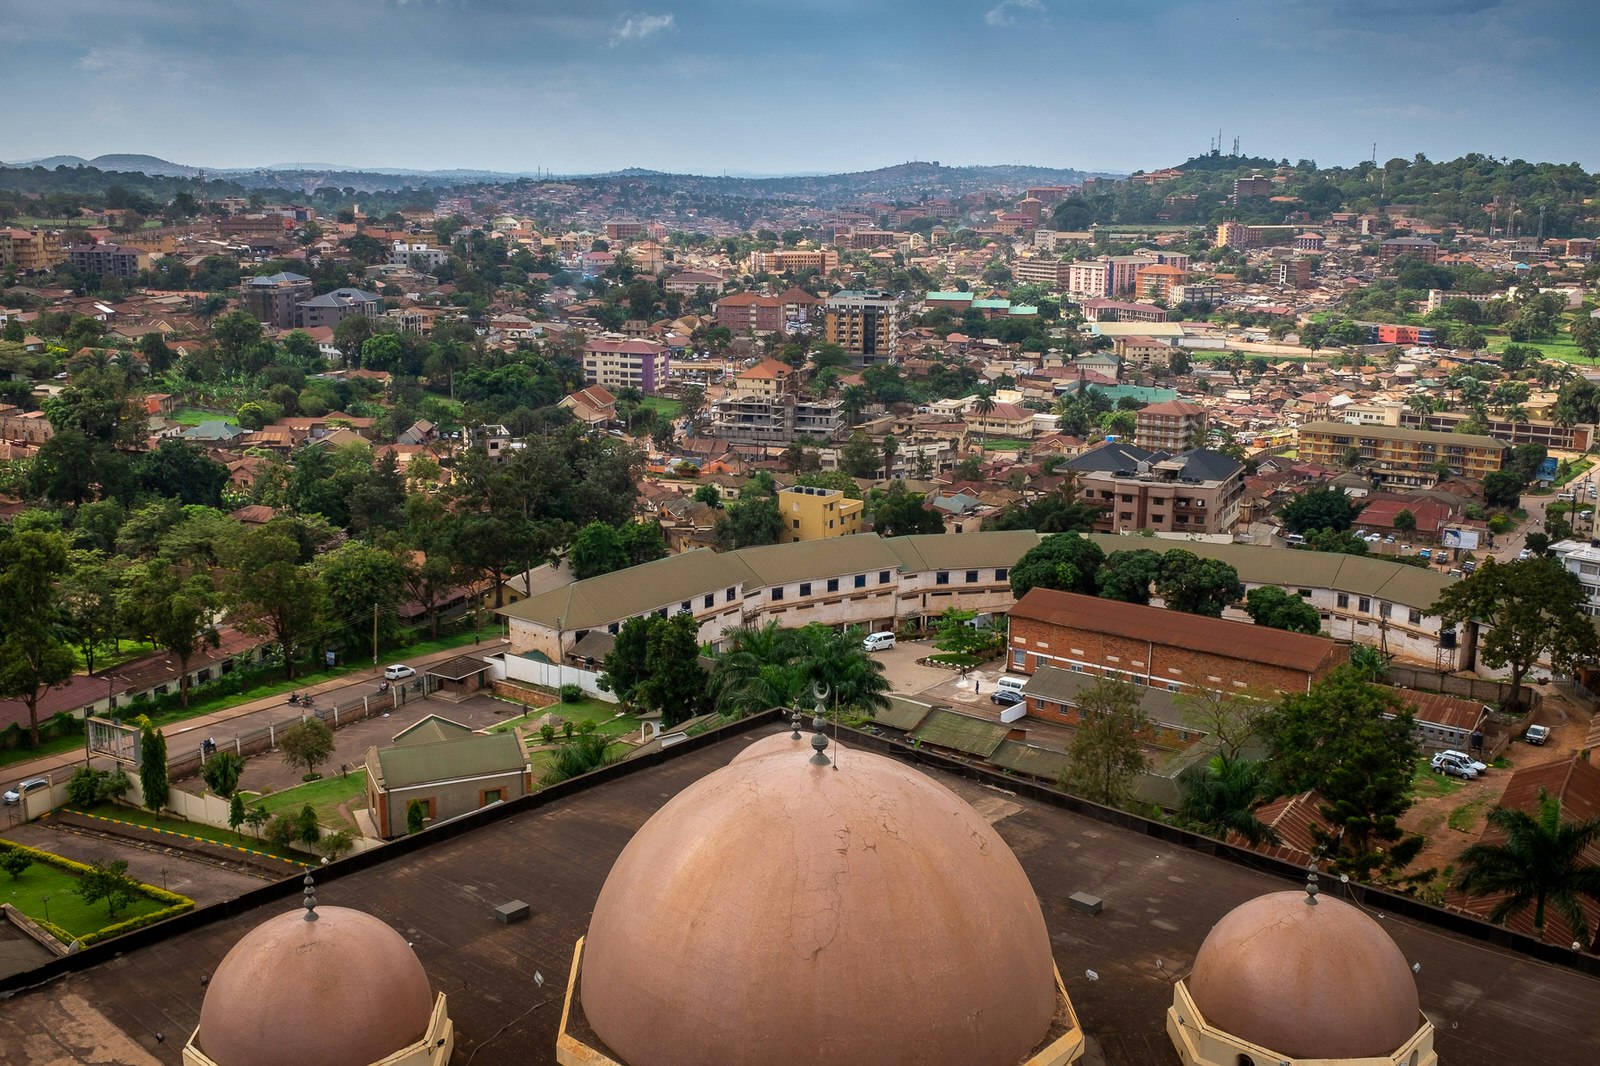 Looking down over three domes (the biggest in the middle, flanked by two smaller ones) atop the Old Kampala National Mosque; in the distance below are the red roofs carpeting the hills of Kampala